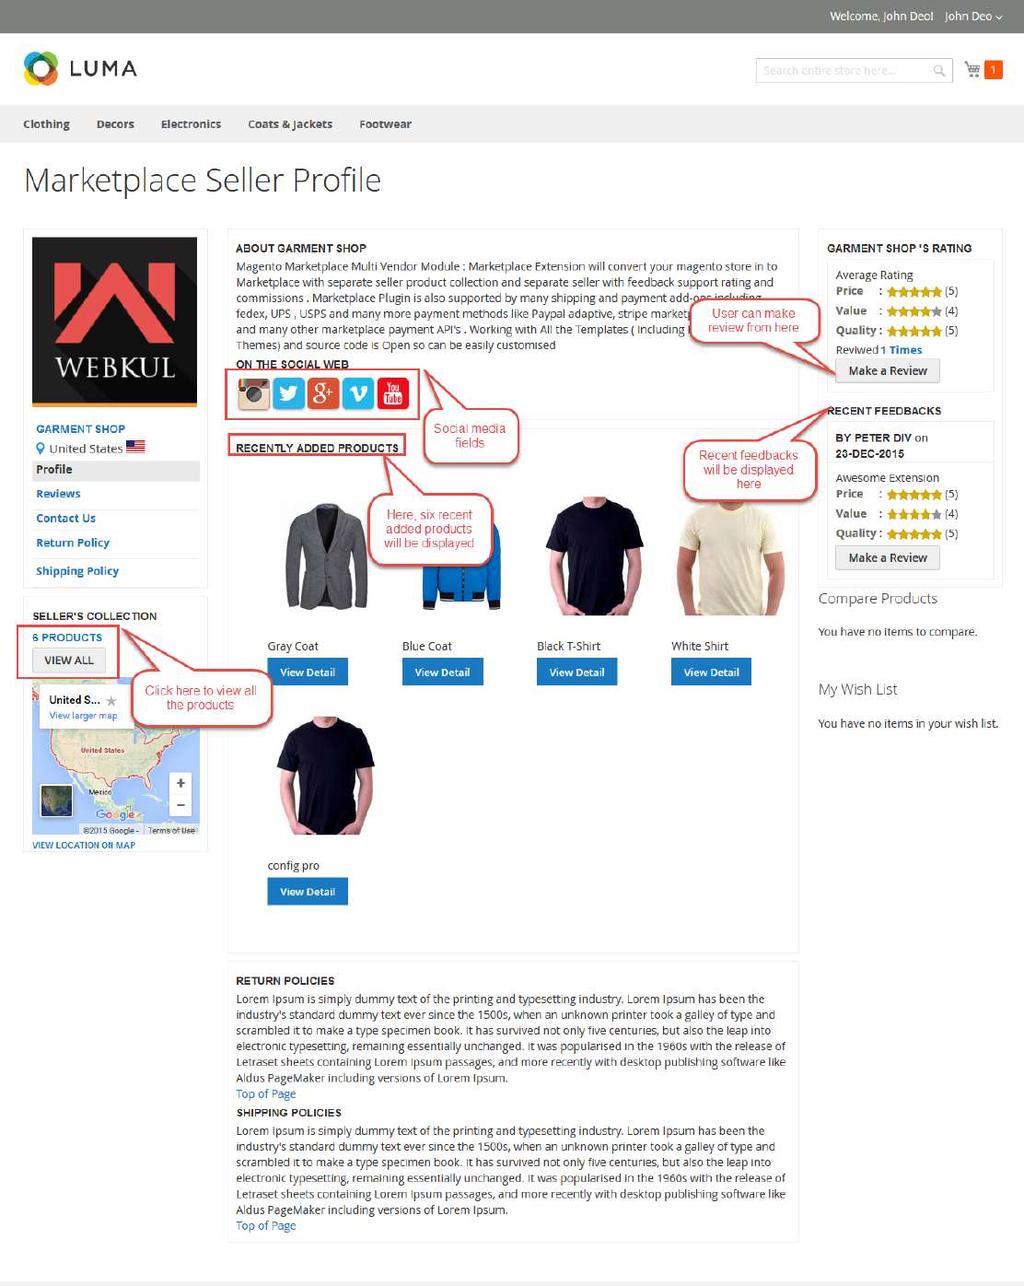 When user will click on View Full Collection, the user will be able to see Seller s Product